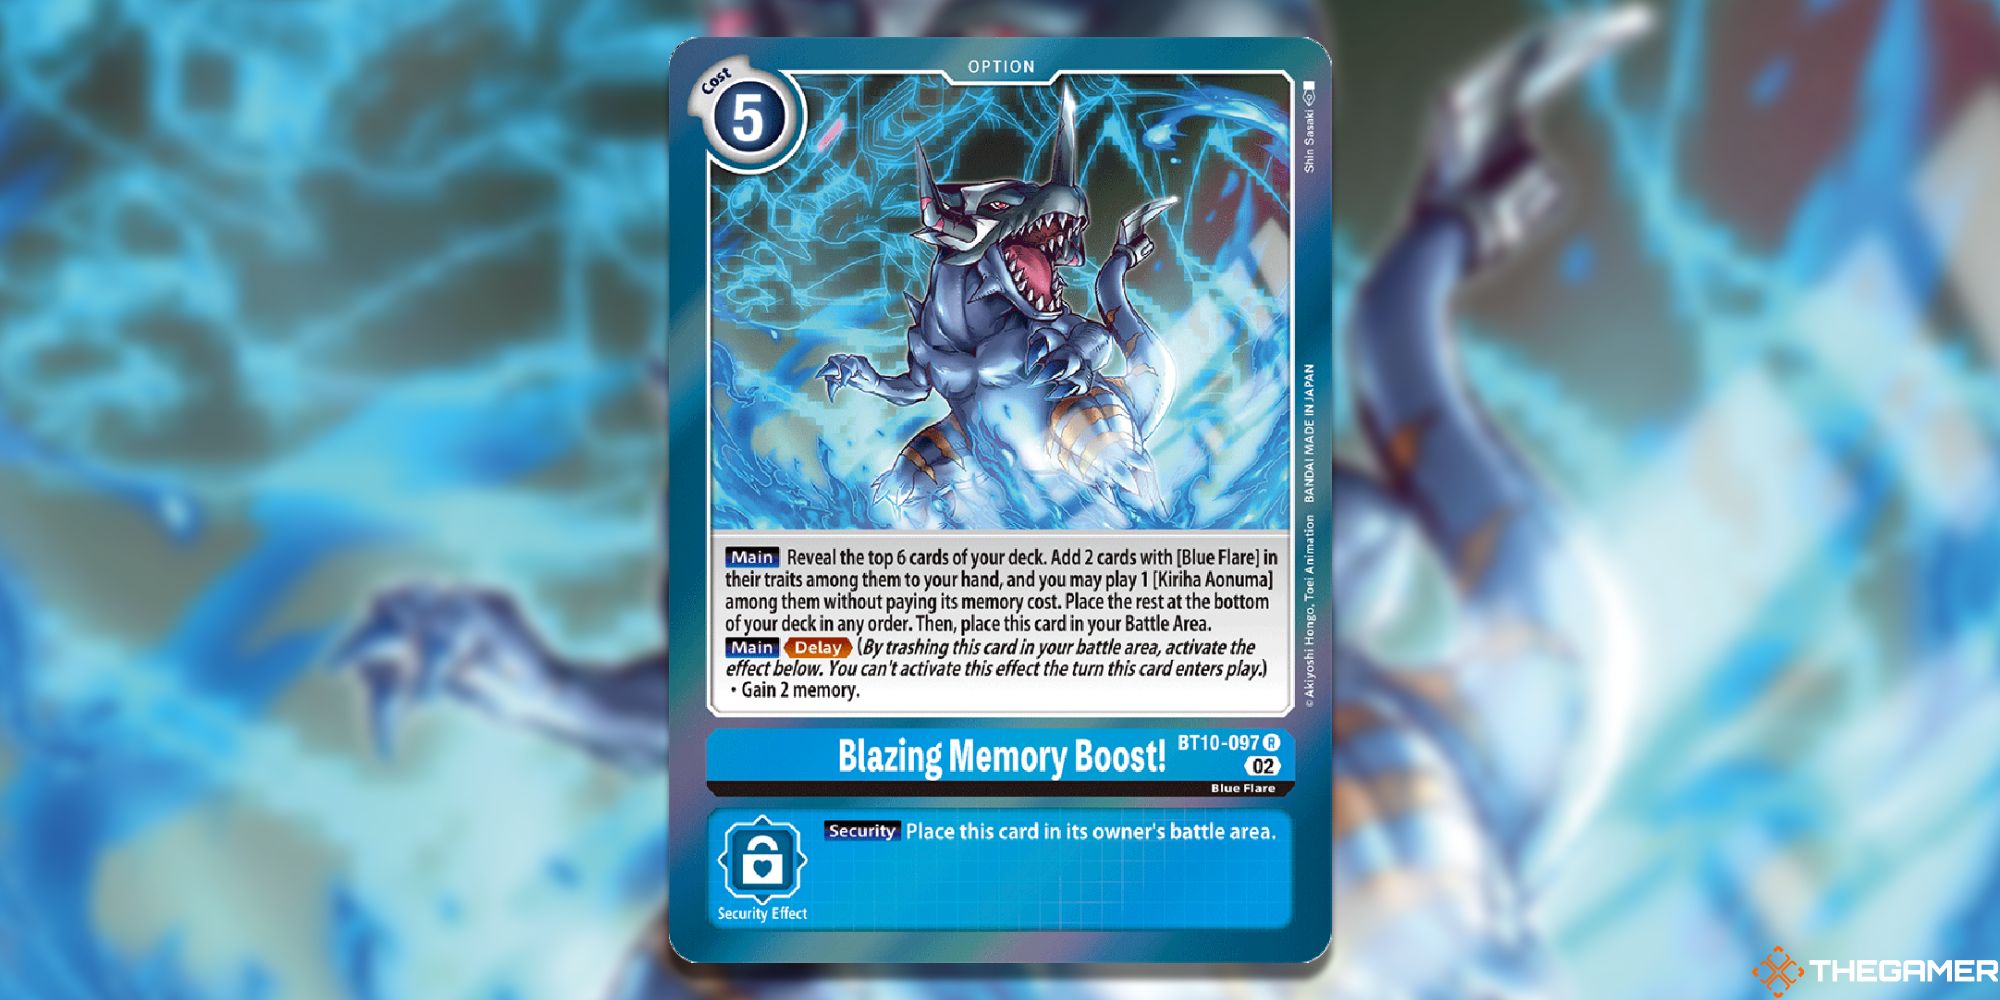 blazing memory boost card from digimon card game with blur background